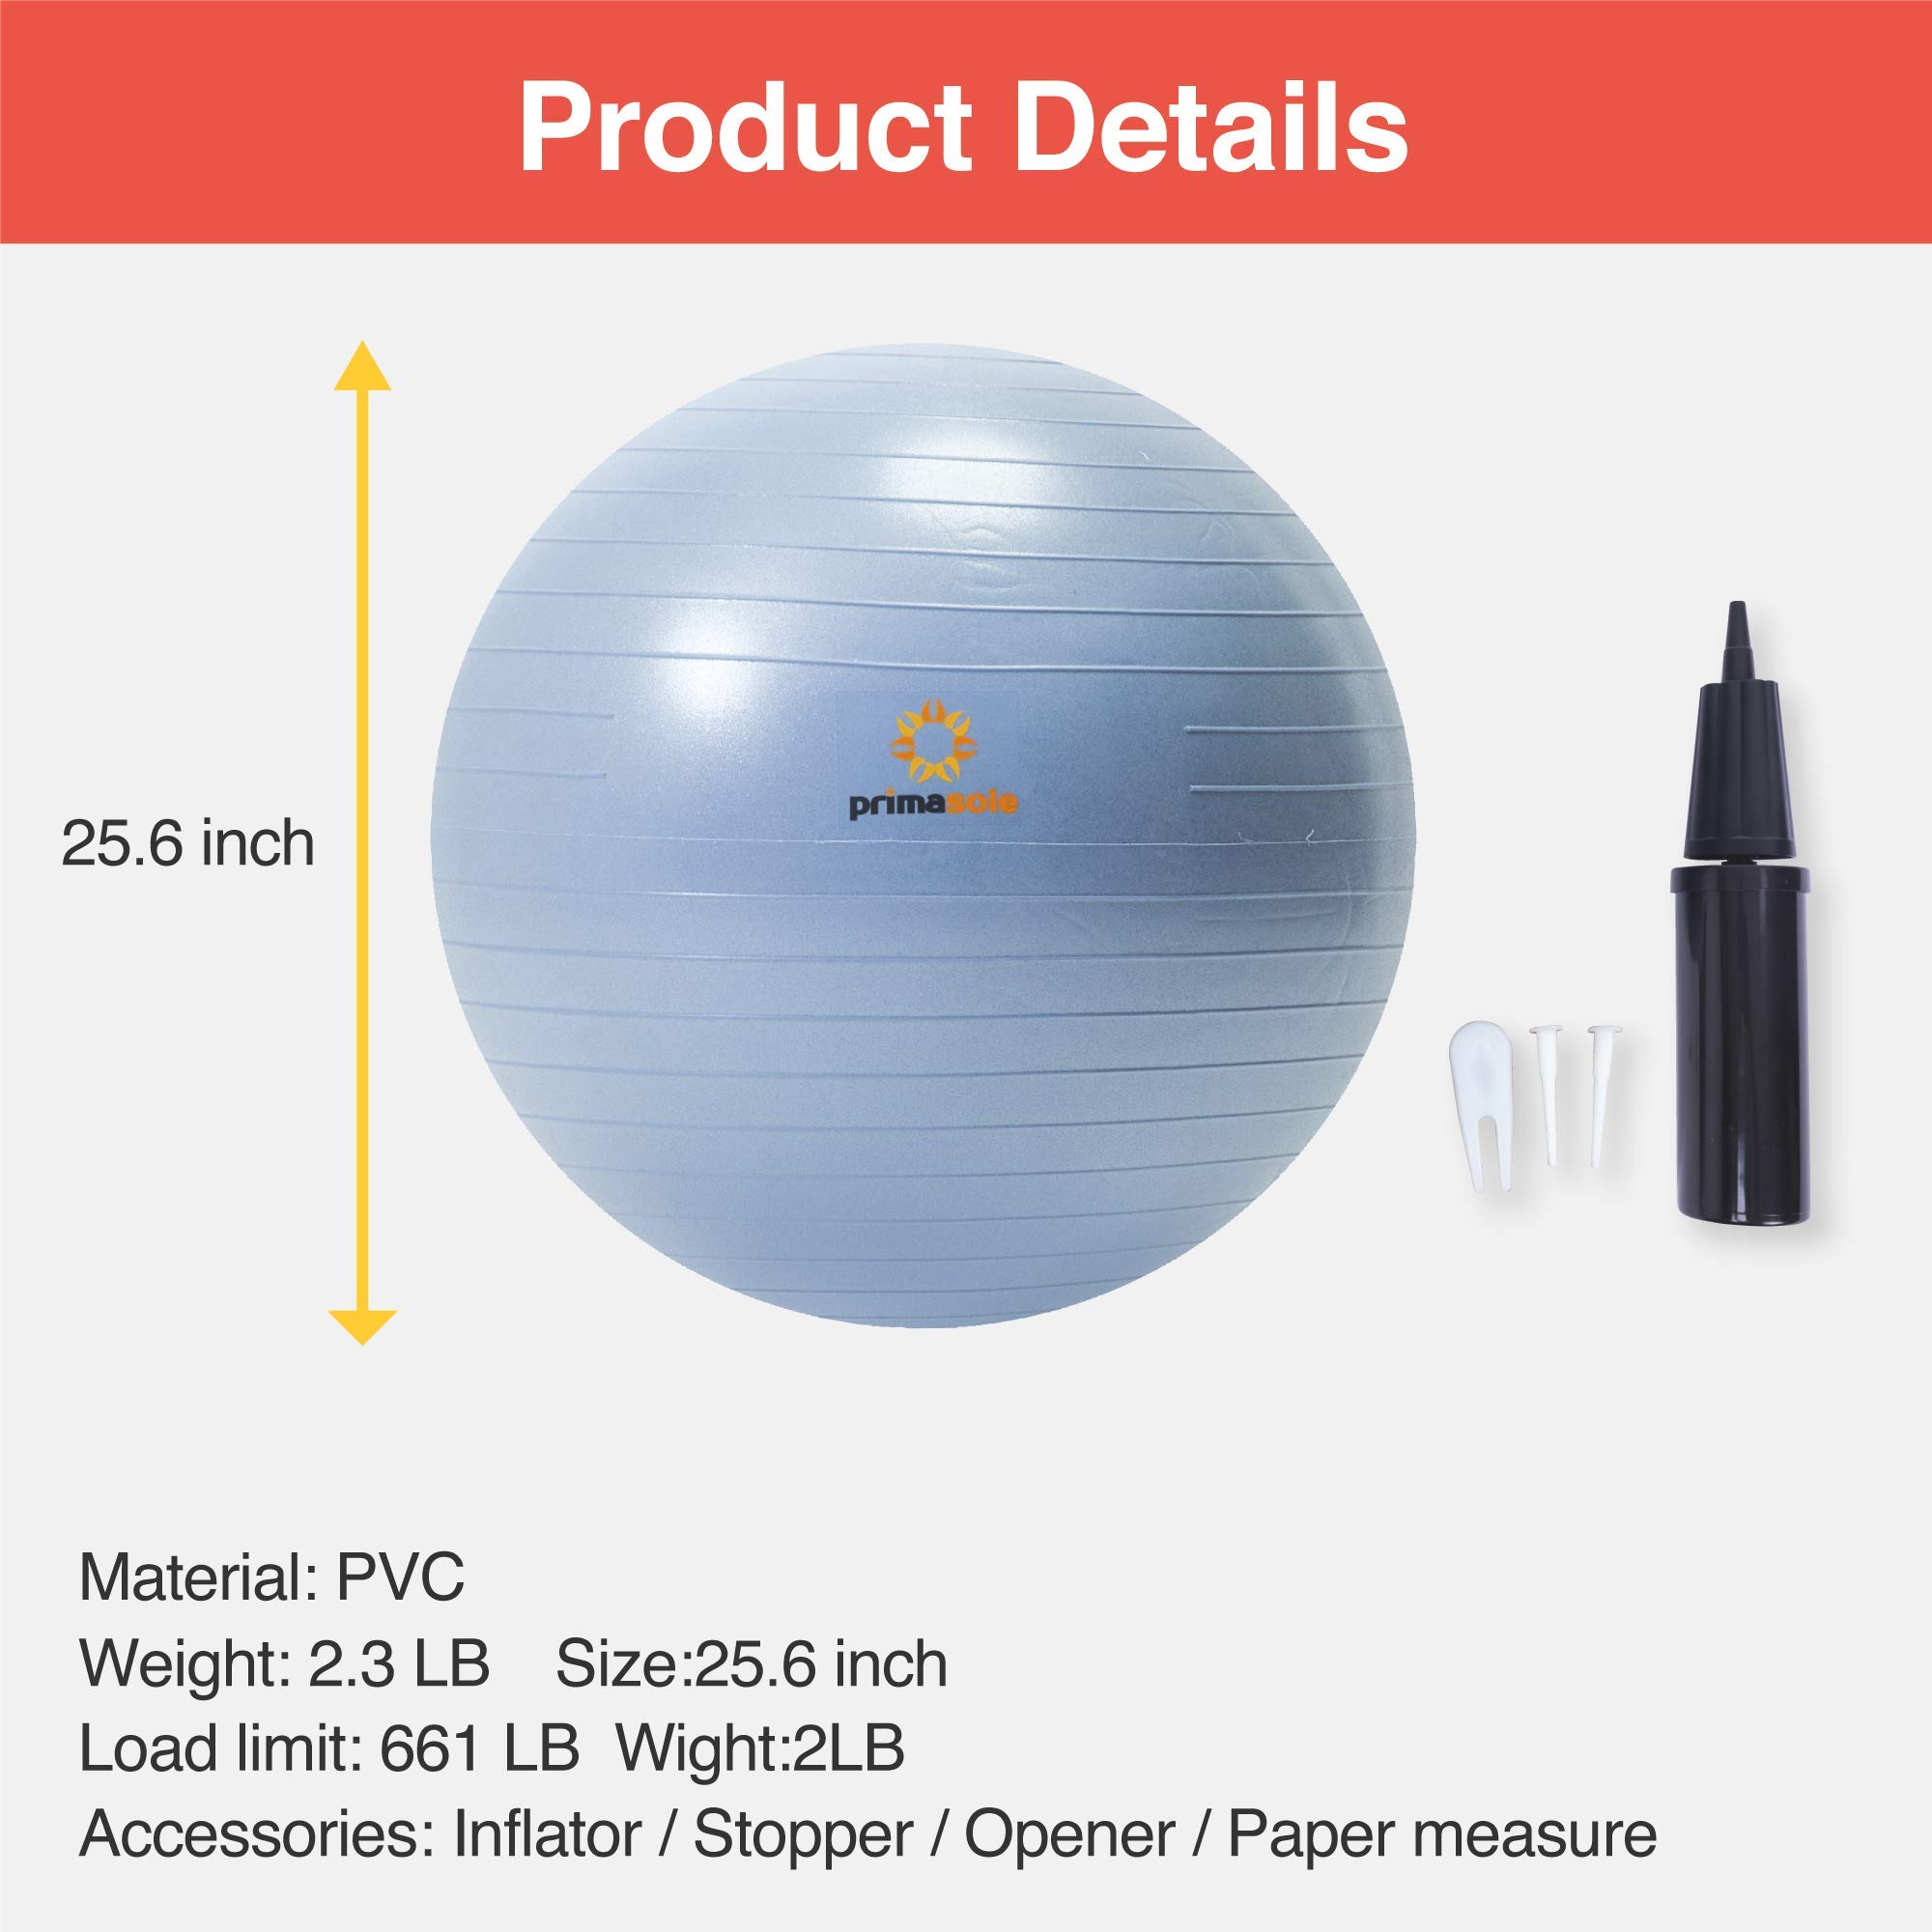 Primasole Exercise Ball for Balance Stability Fitness Workout Yoga Pilates at Home Office & Gym with Inflator Pump